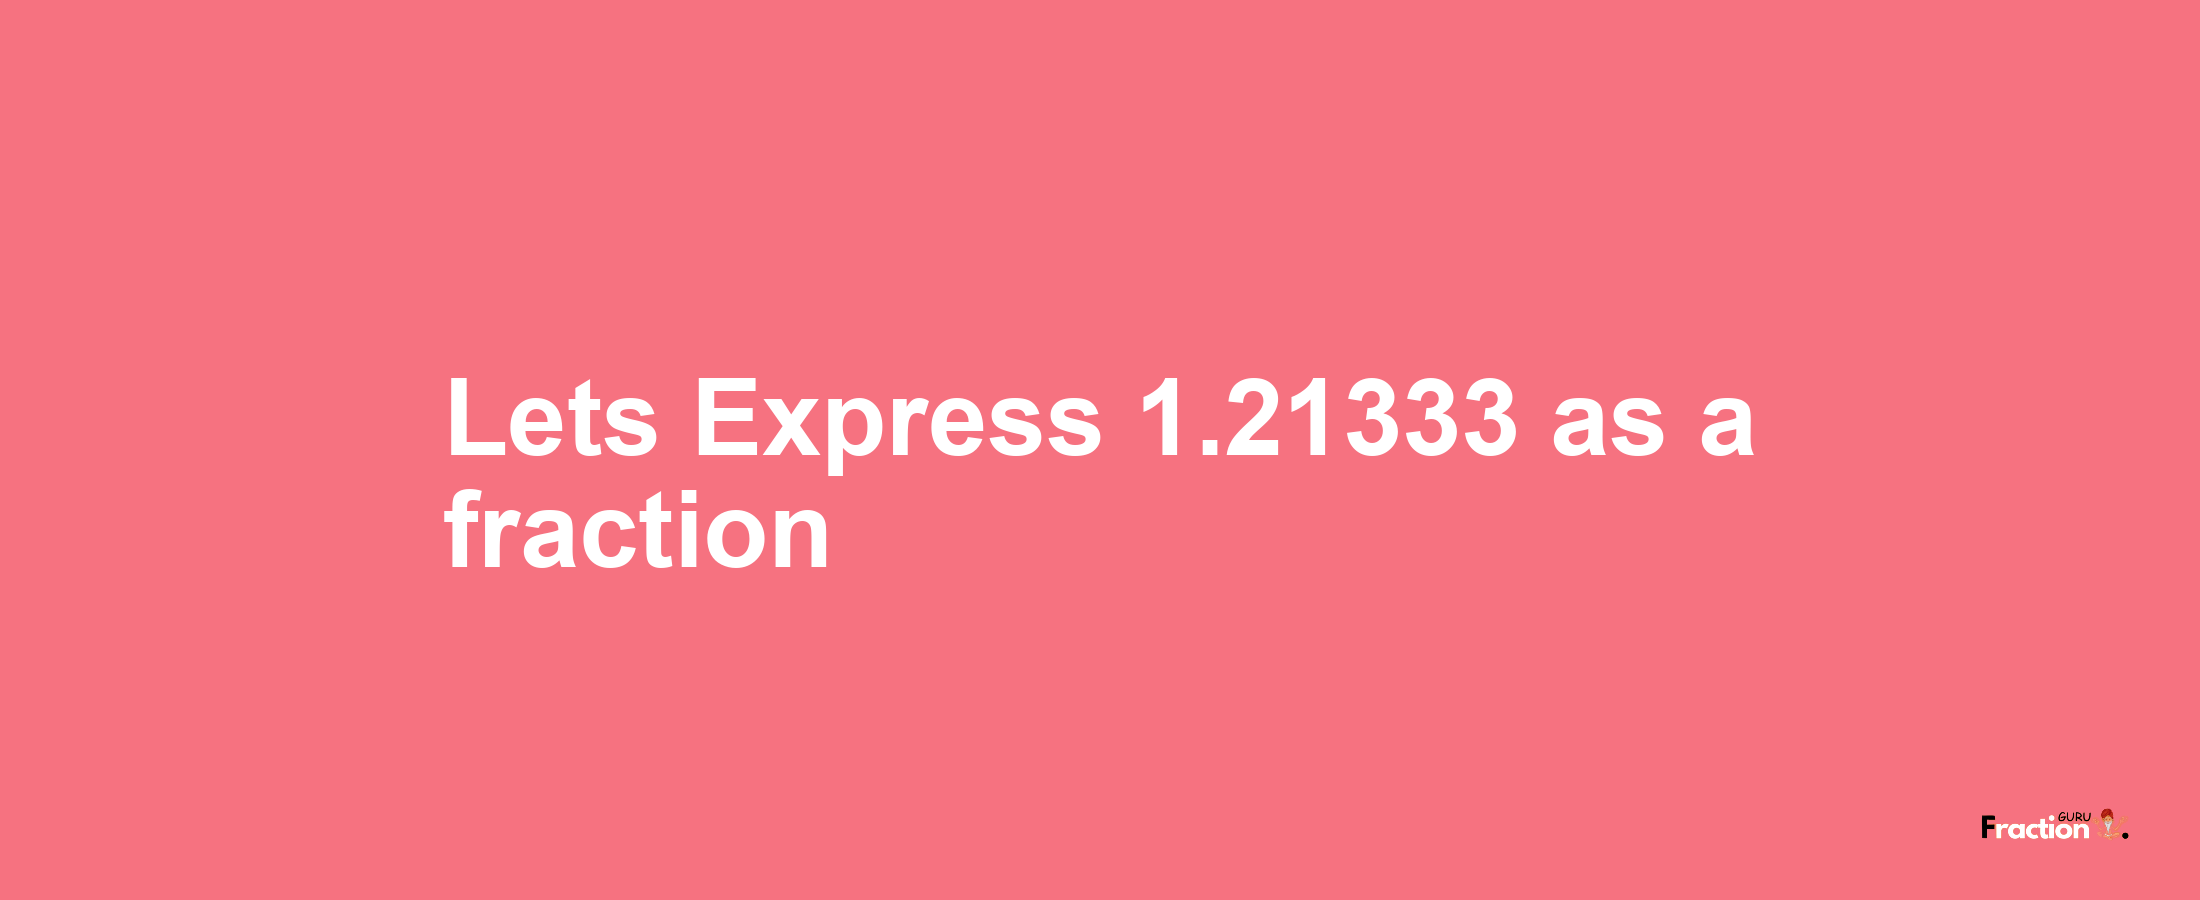 Lets Express 1.21333 as afraction